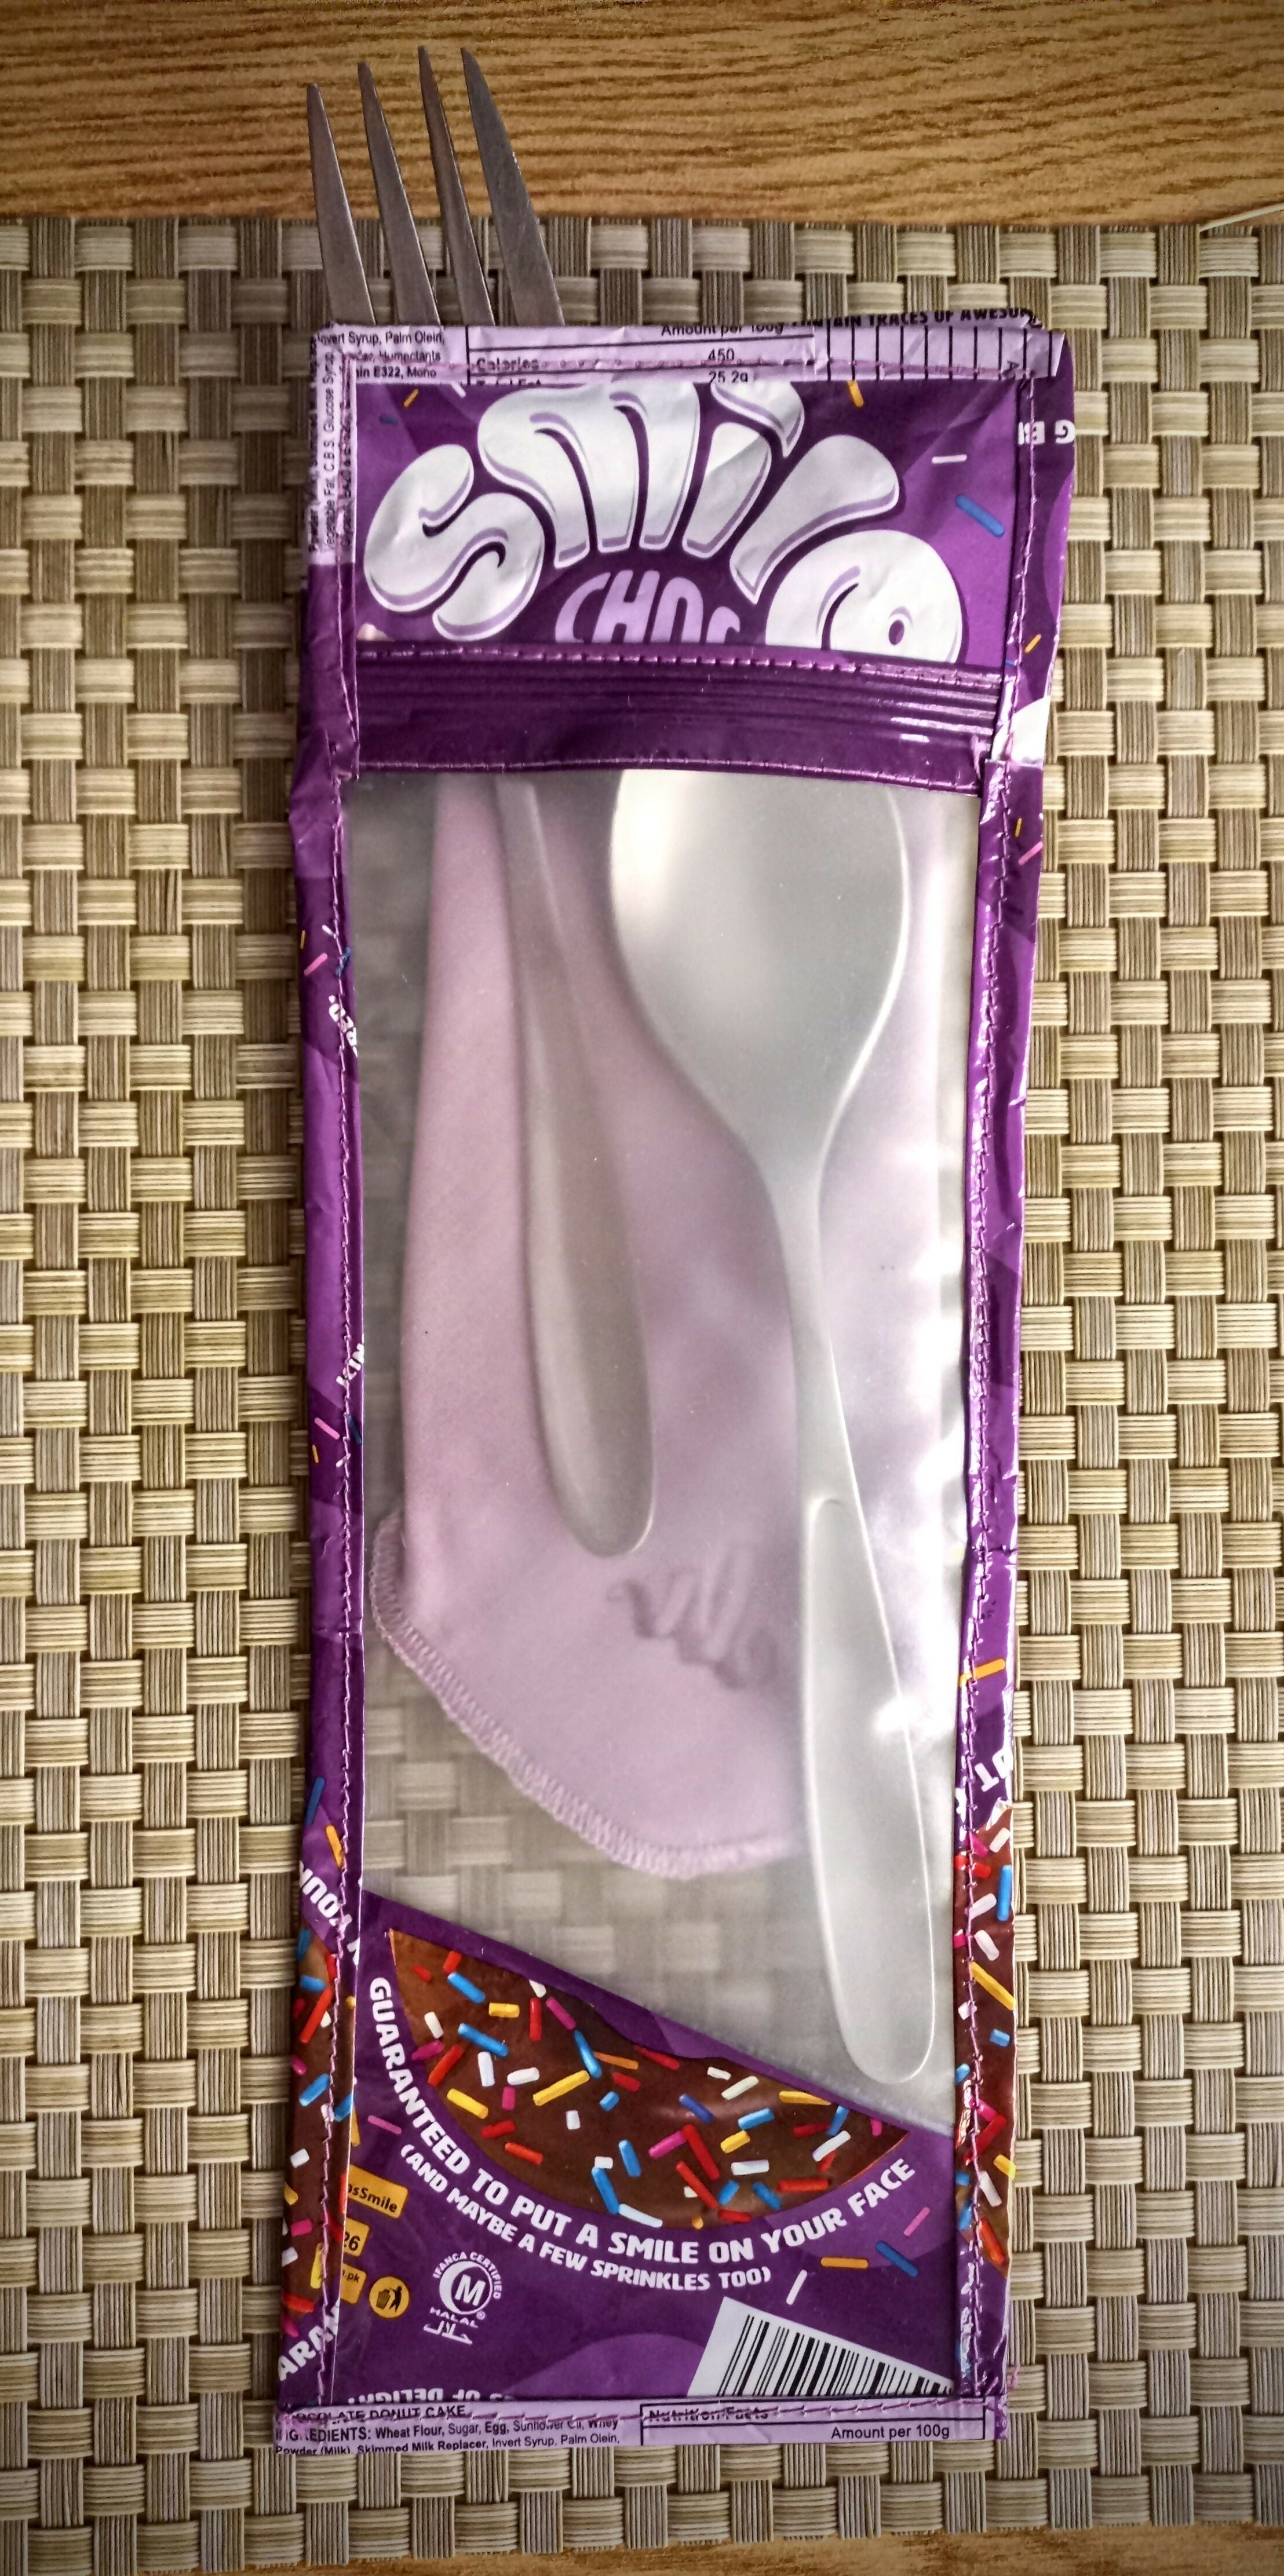 WrapUp | Cutlery Case with Napkin | Made with Upcycled Plastic | Brand New with Tags